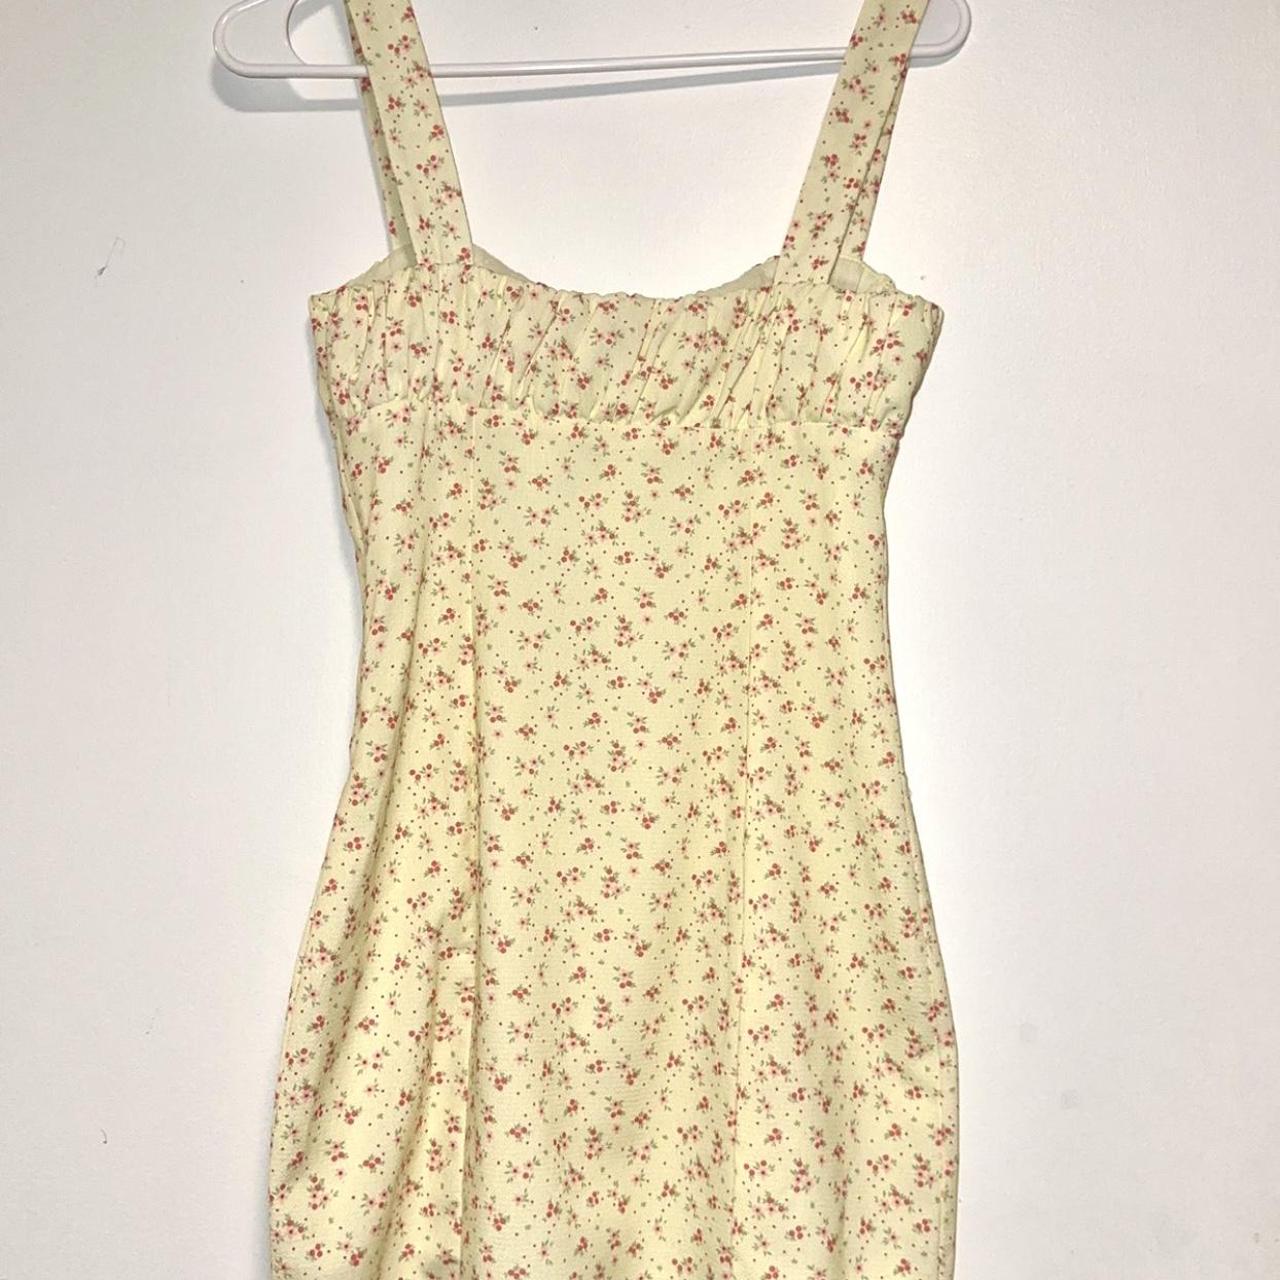 Princess Polly Women's Yellow and Red Dress | Depop